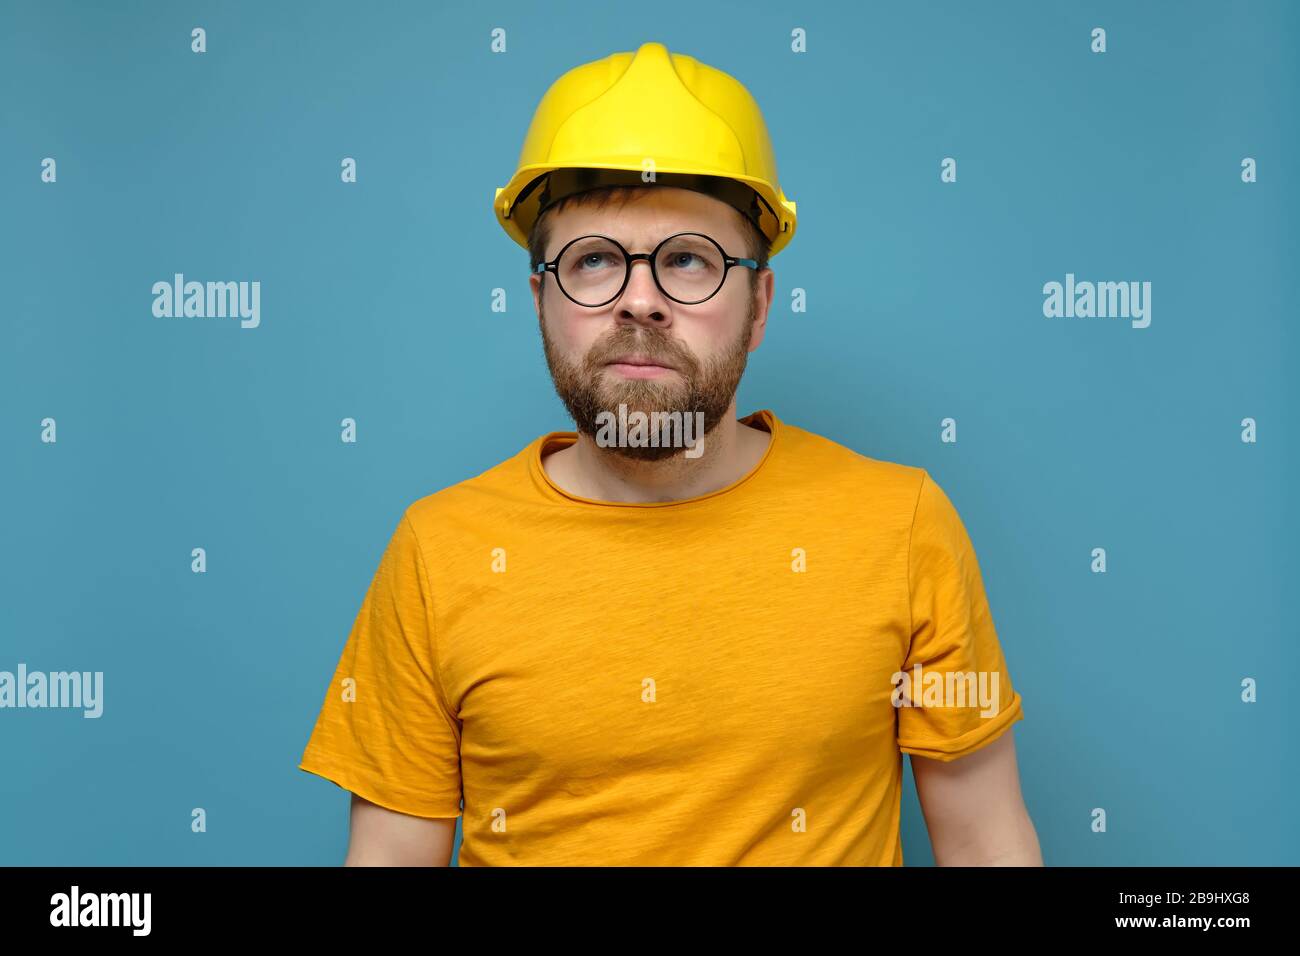 Puzzled bearded man in a construction helmet and round glasses looks up thoughtfully, on a blue background. Stock Photo